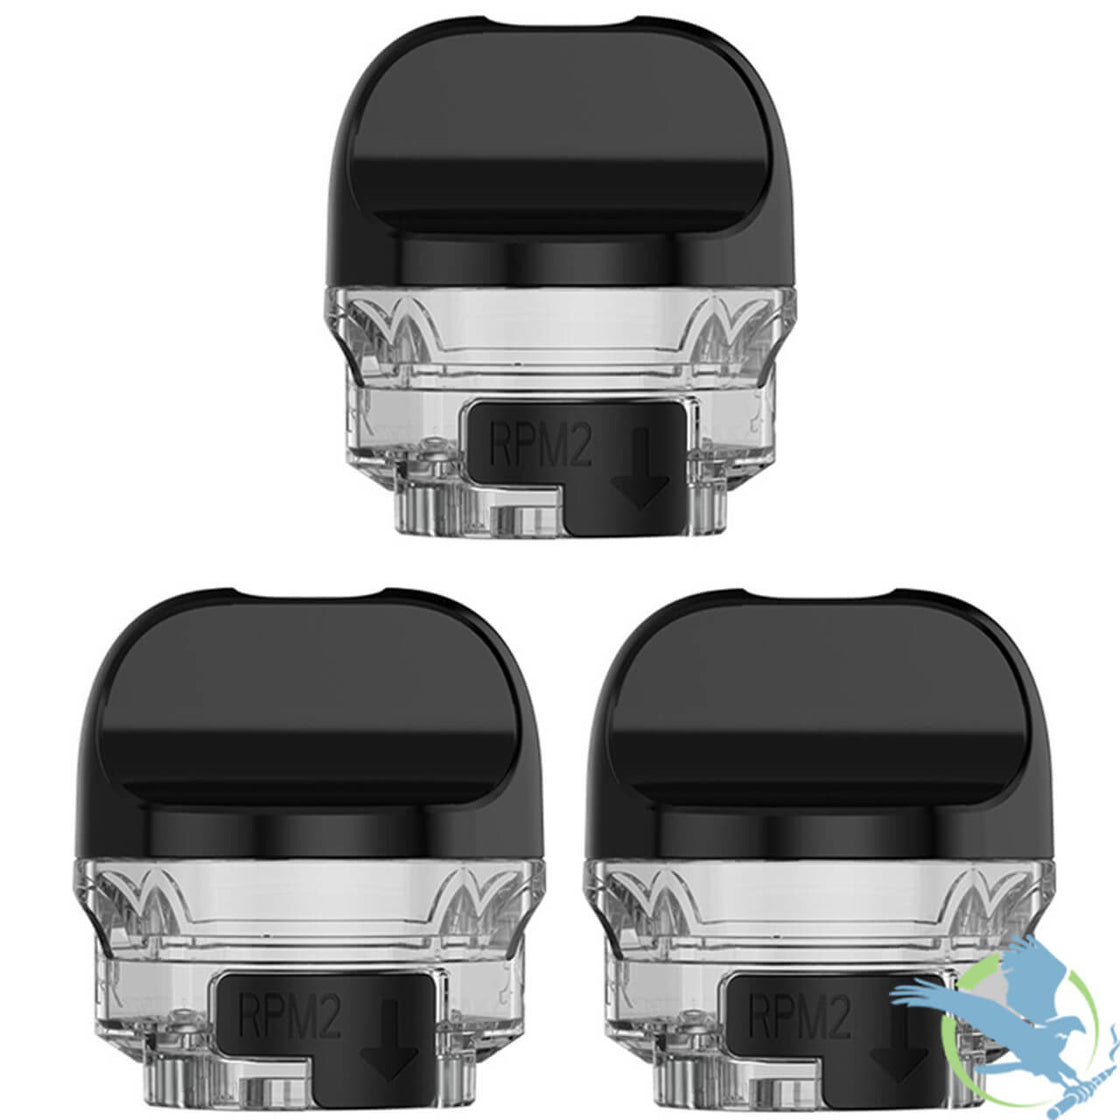 SMOK IPX 80 5.5ML RPM / RPM 2 Empty Refillable Replacement Pod - Pack of 3